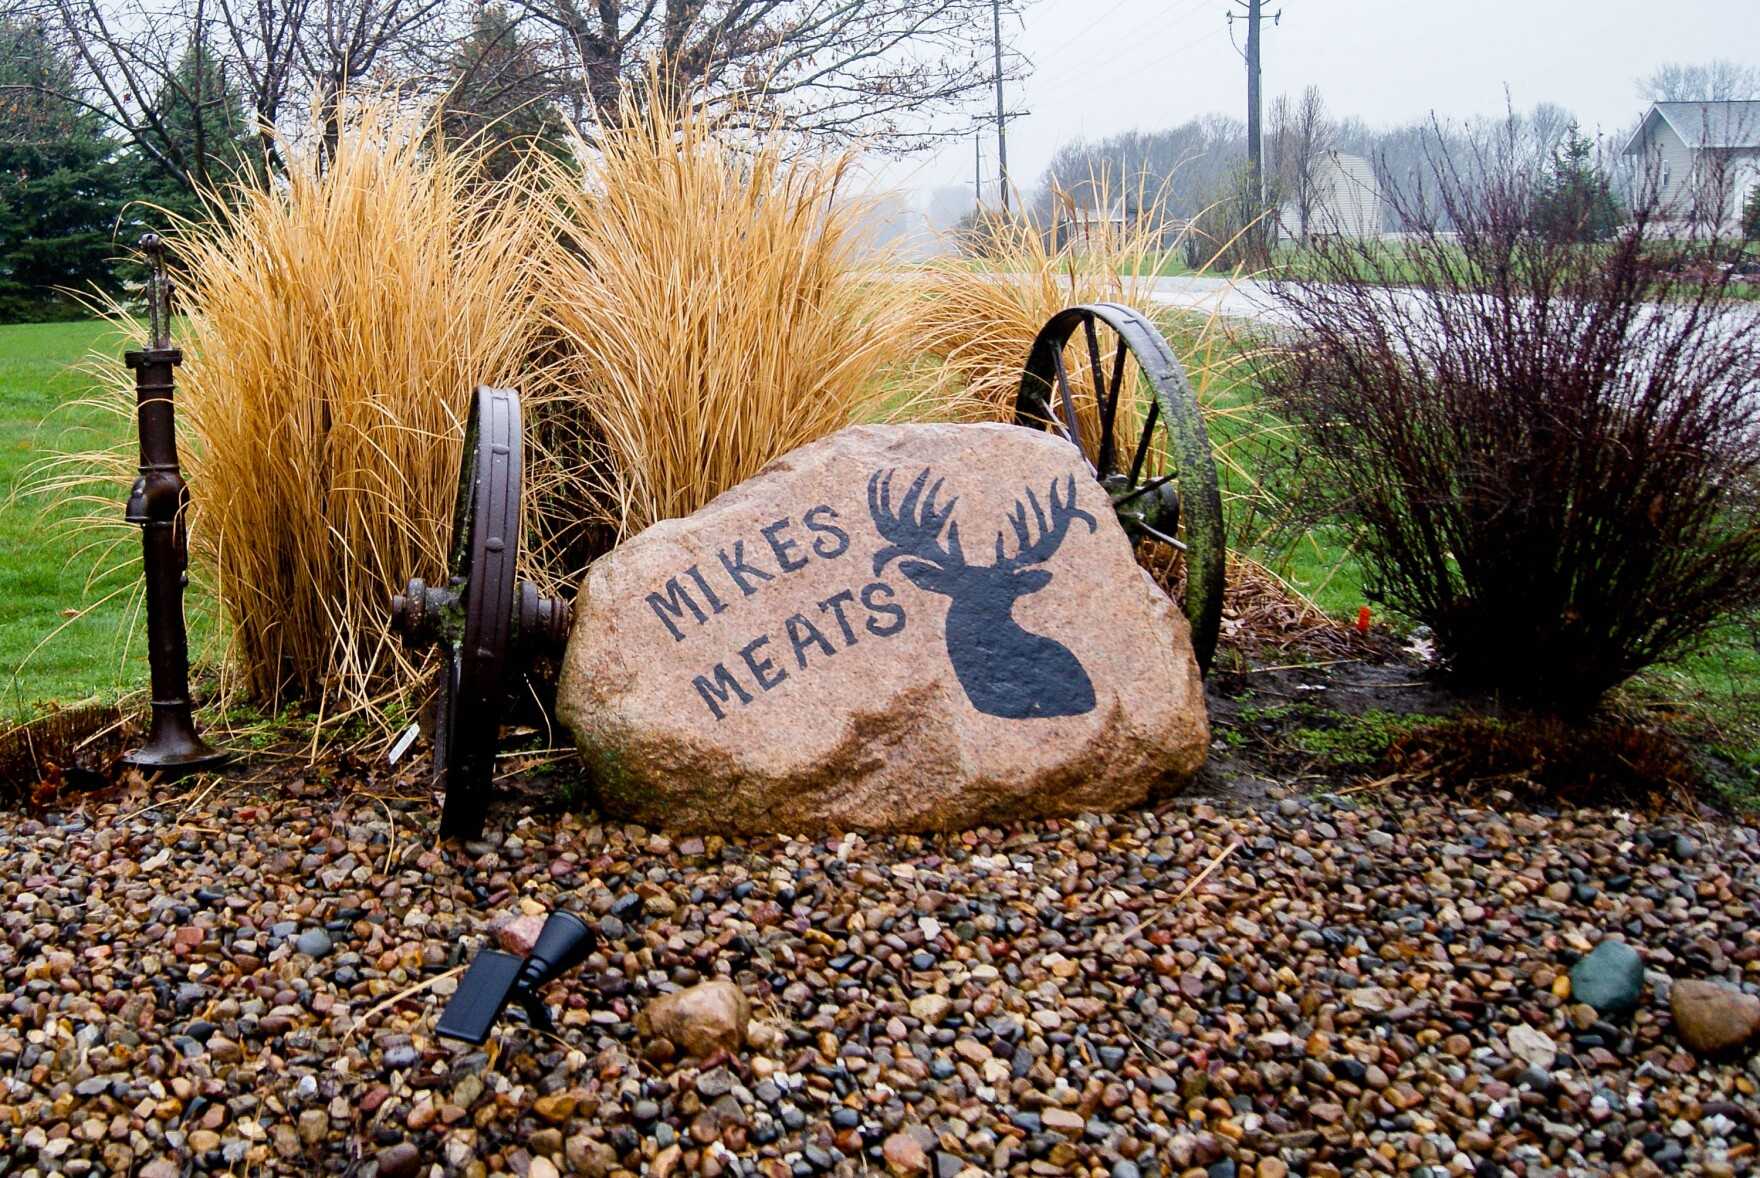 A garden area where a large rock is painted to say 'Mikes Meats" with a picture of a buck.